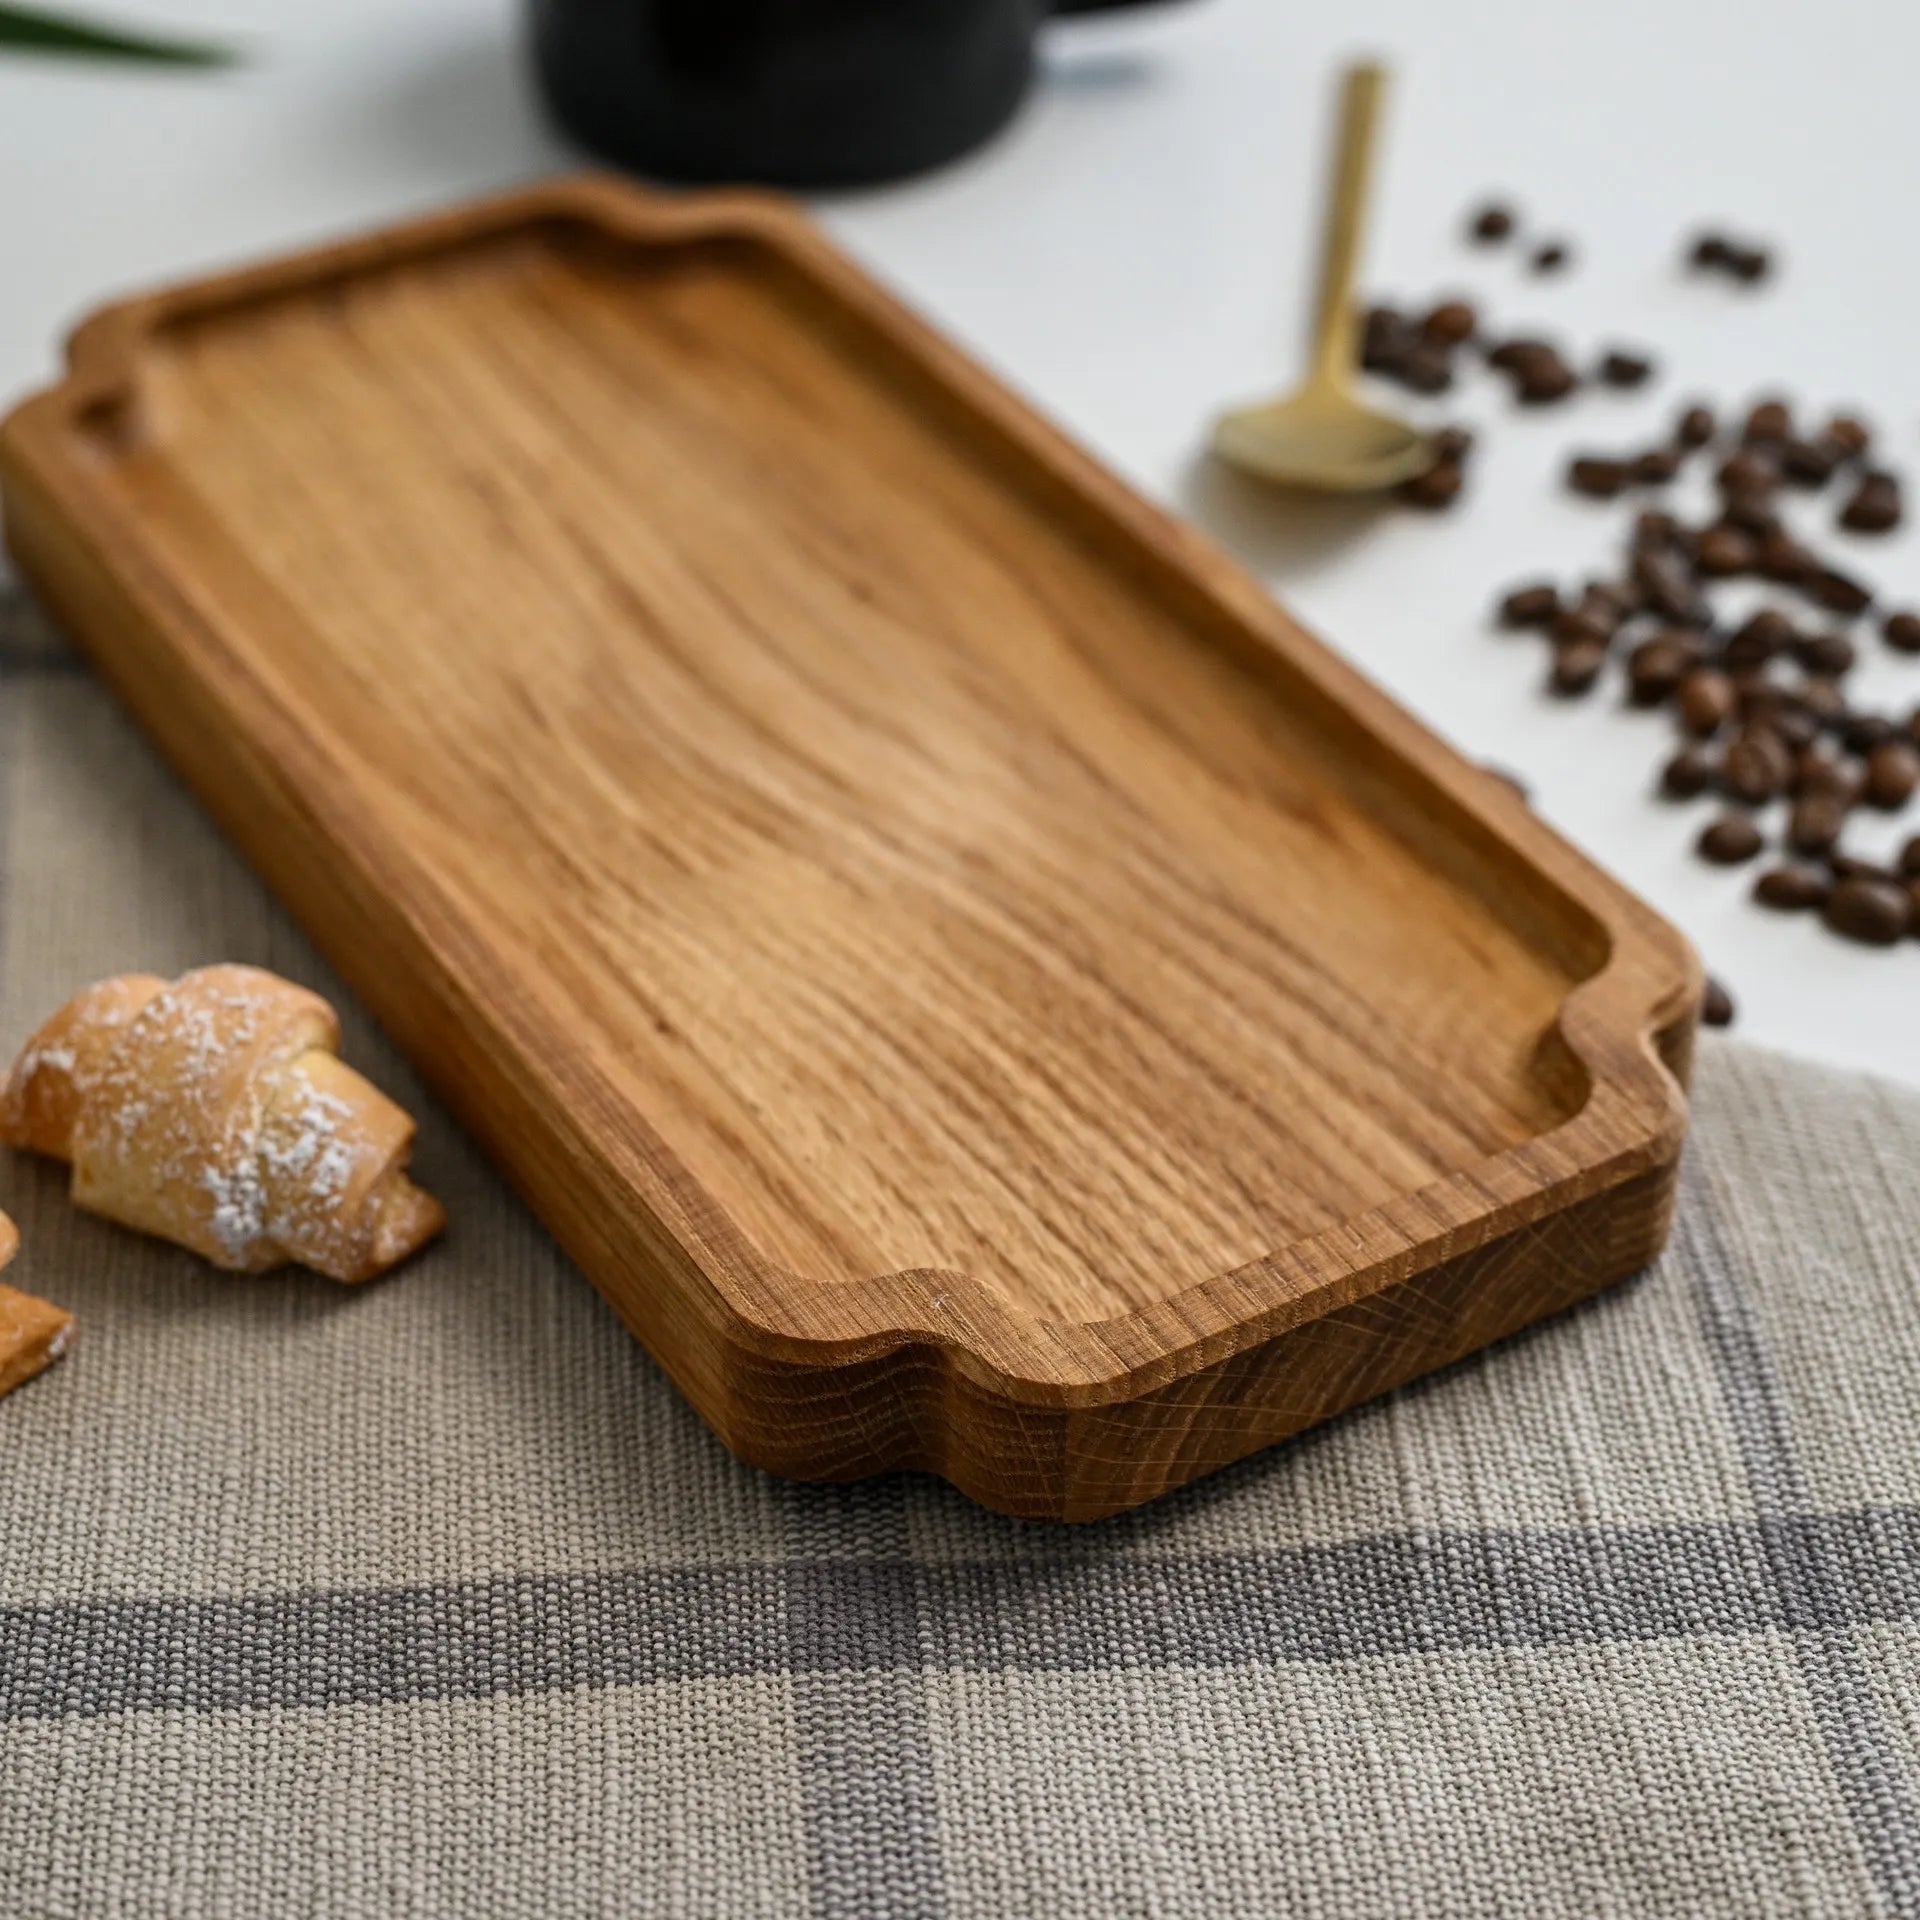 Personalised coffee table tray made of rustic wood, perfect for adding a charming touch to hotel rooms and guest areas.